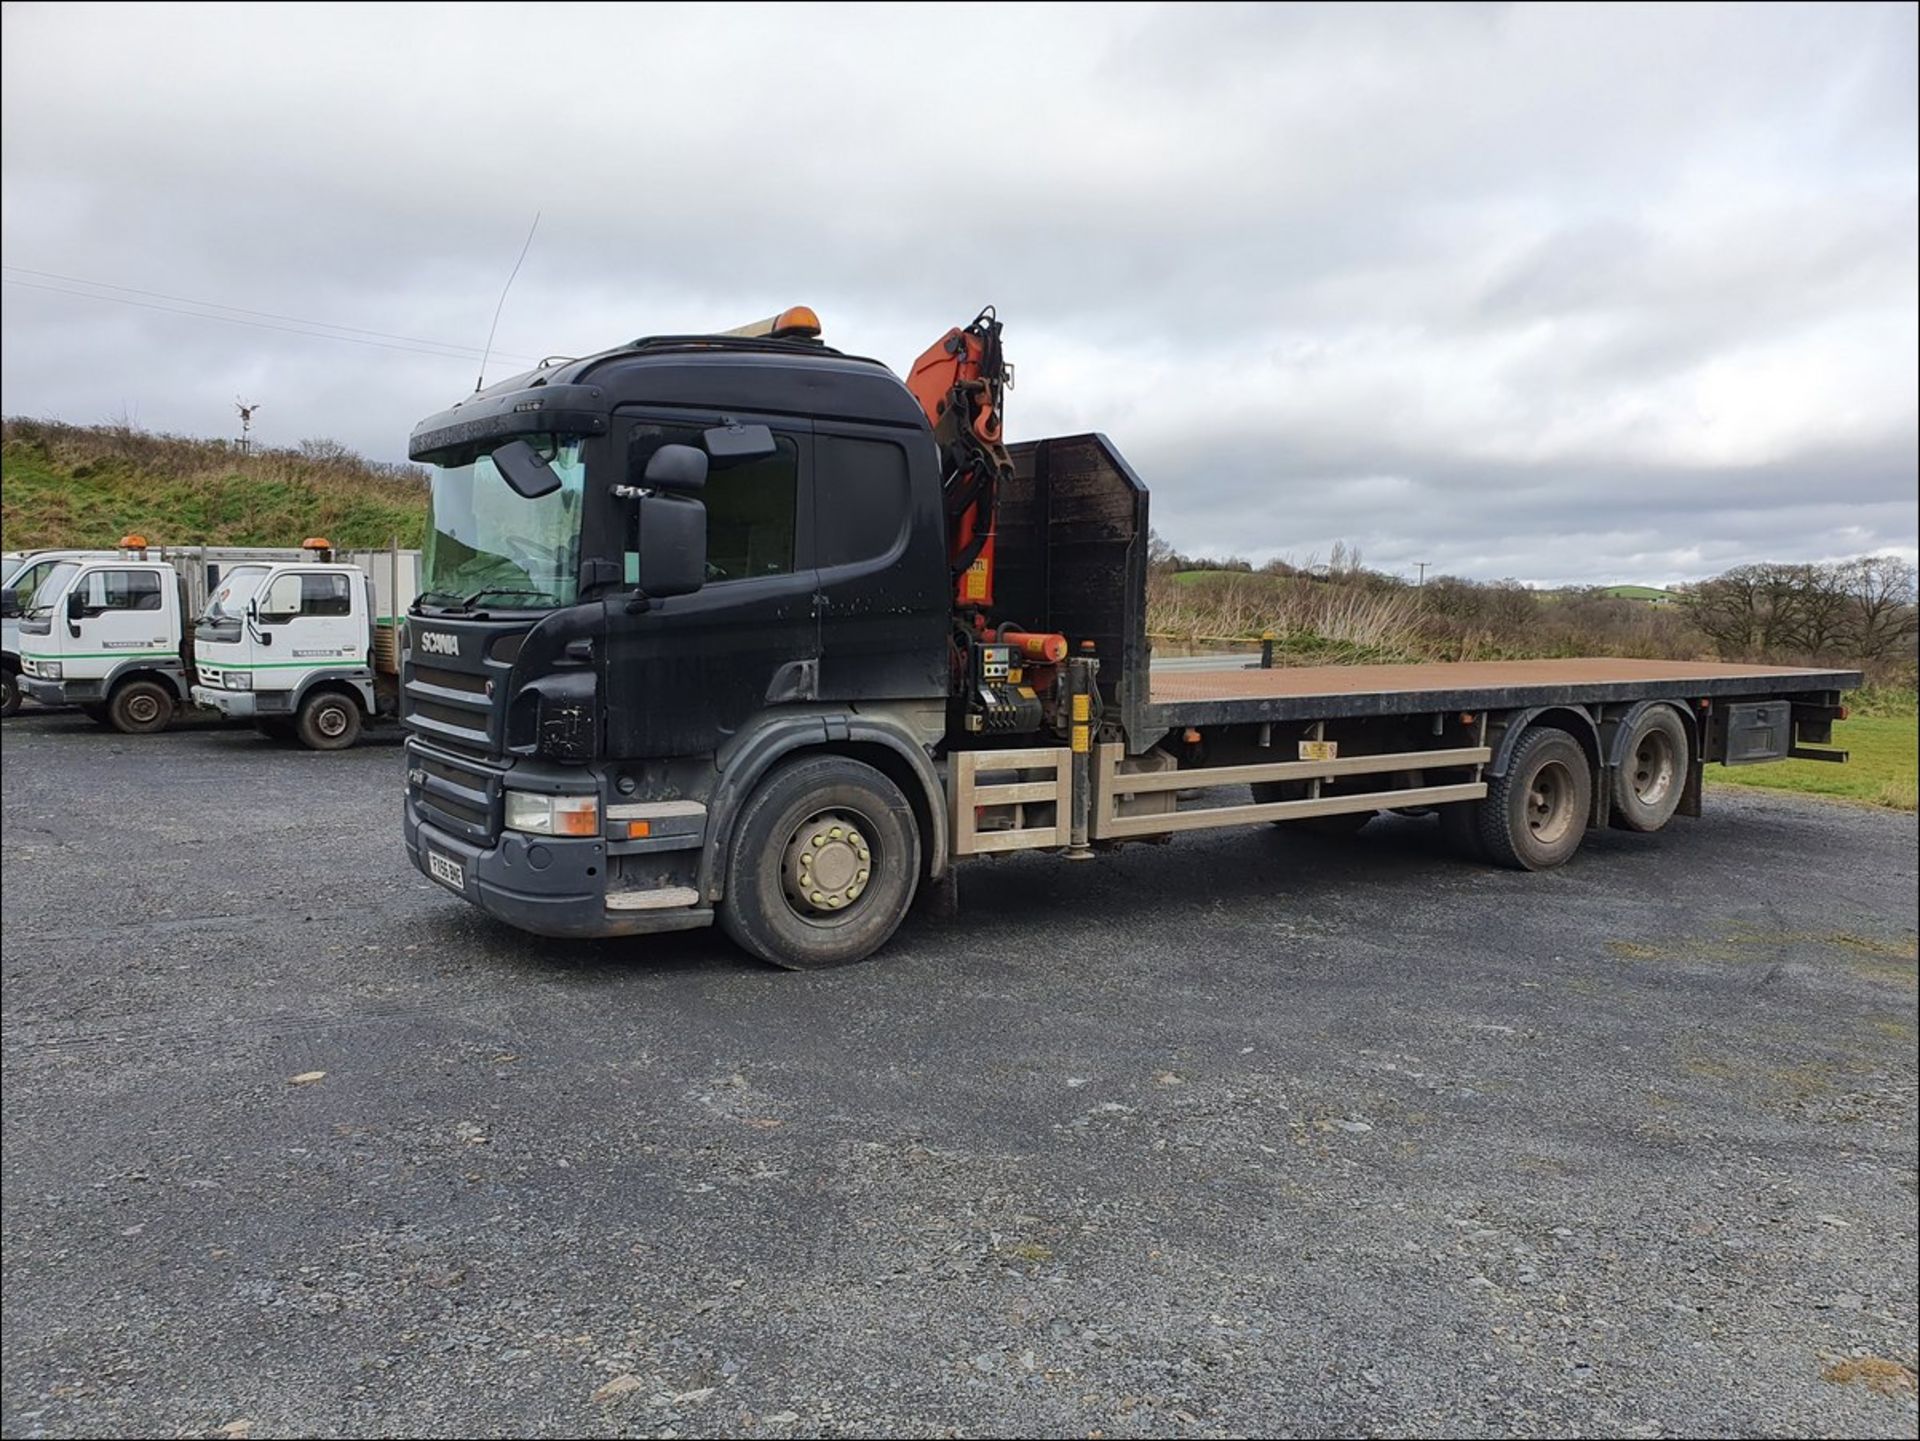 06/56 SCANIA P-SRS D-CLASS - 8970cc 2dr Flat Bed (Black) - Image 4 of 19